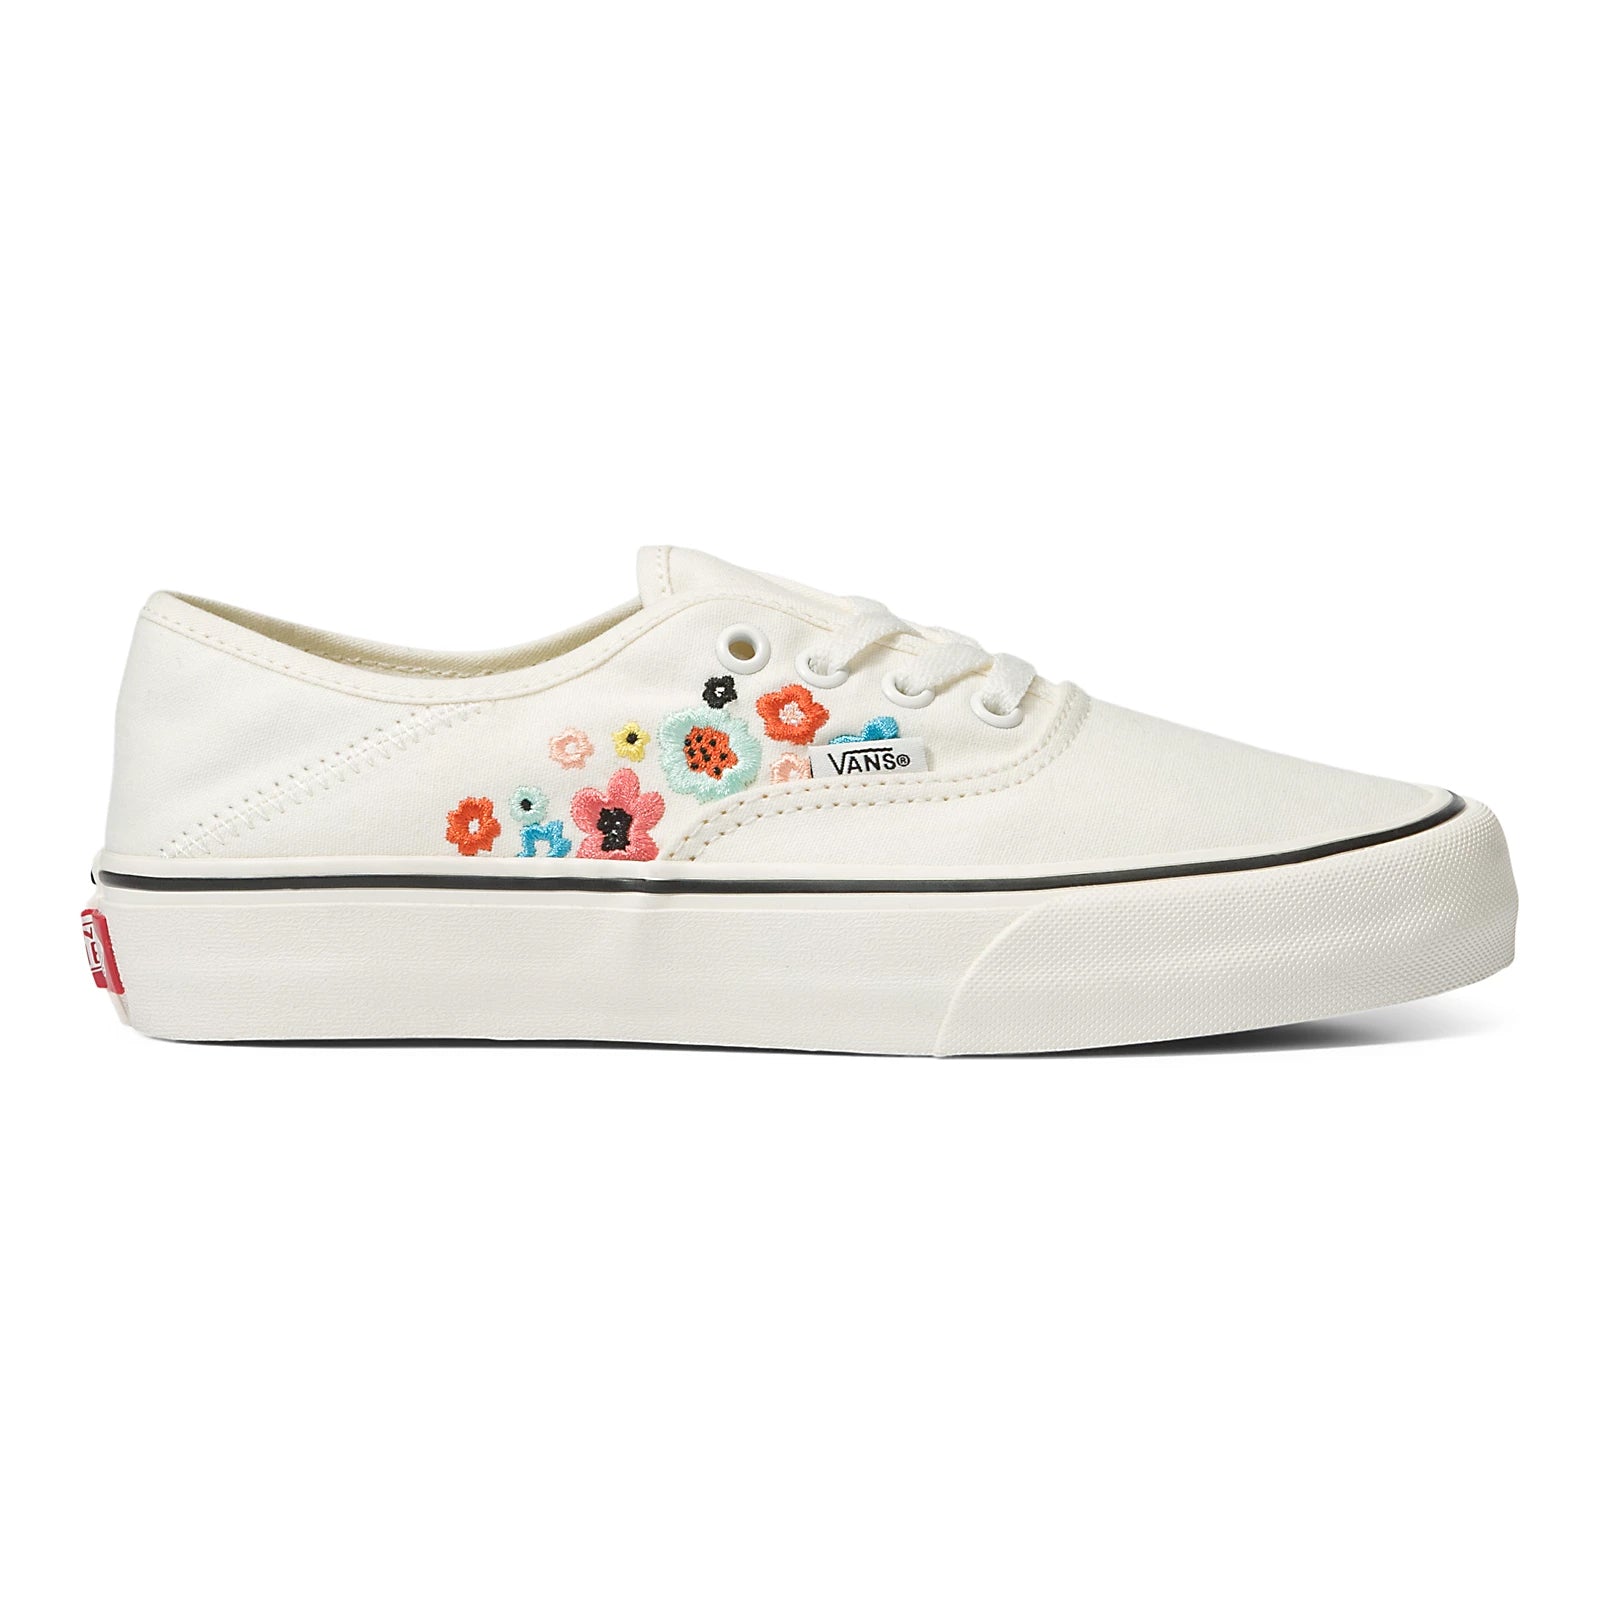 Vans Womens UA Authentic VR3 GroovyFloral/Marshmallow 7w